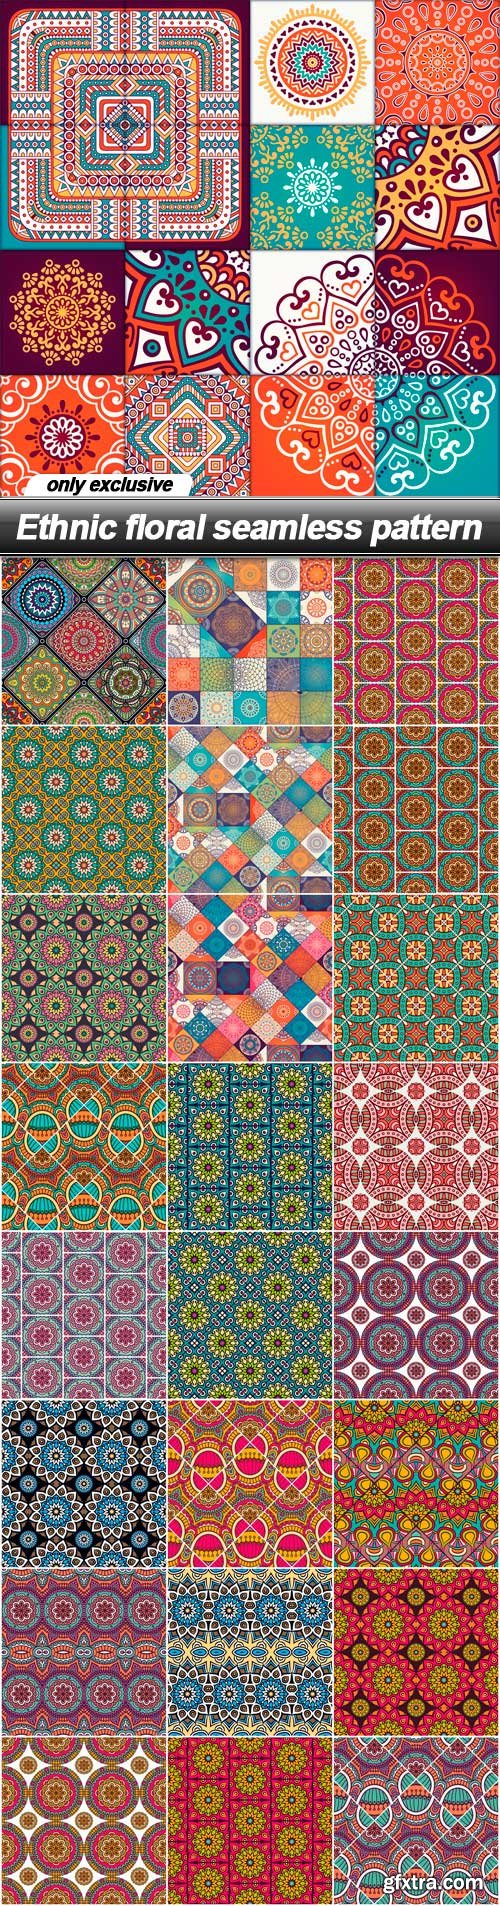 Ethnic floral seamless pattern - 25 EPS